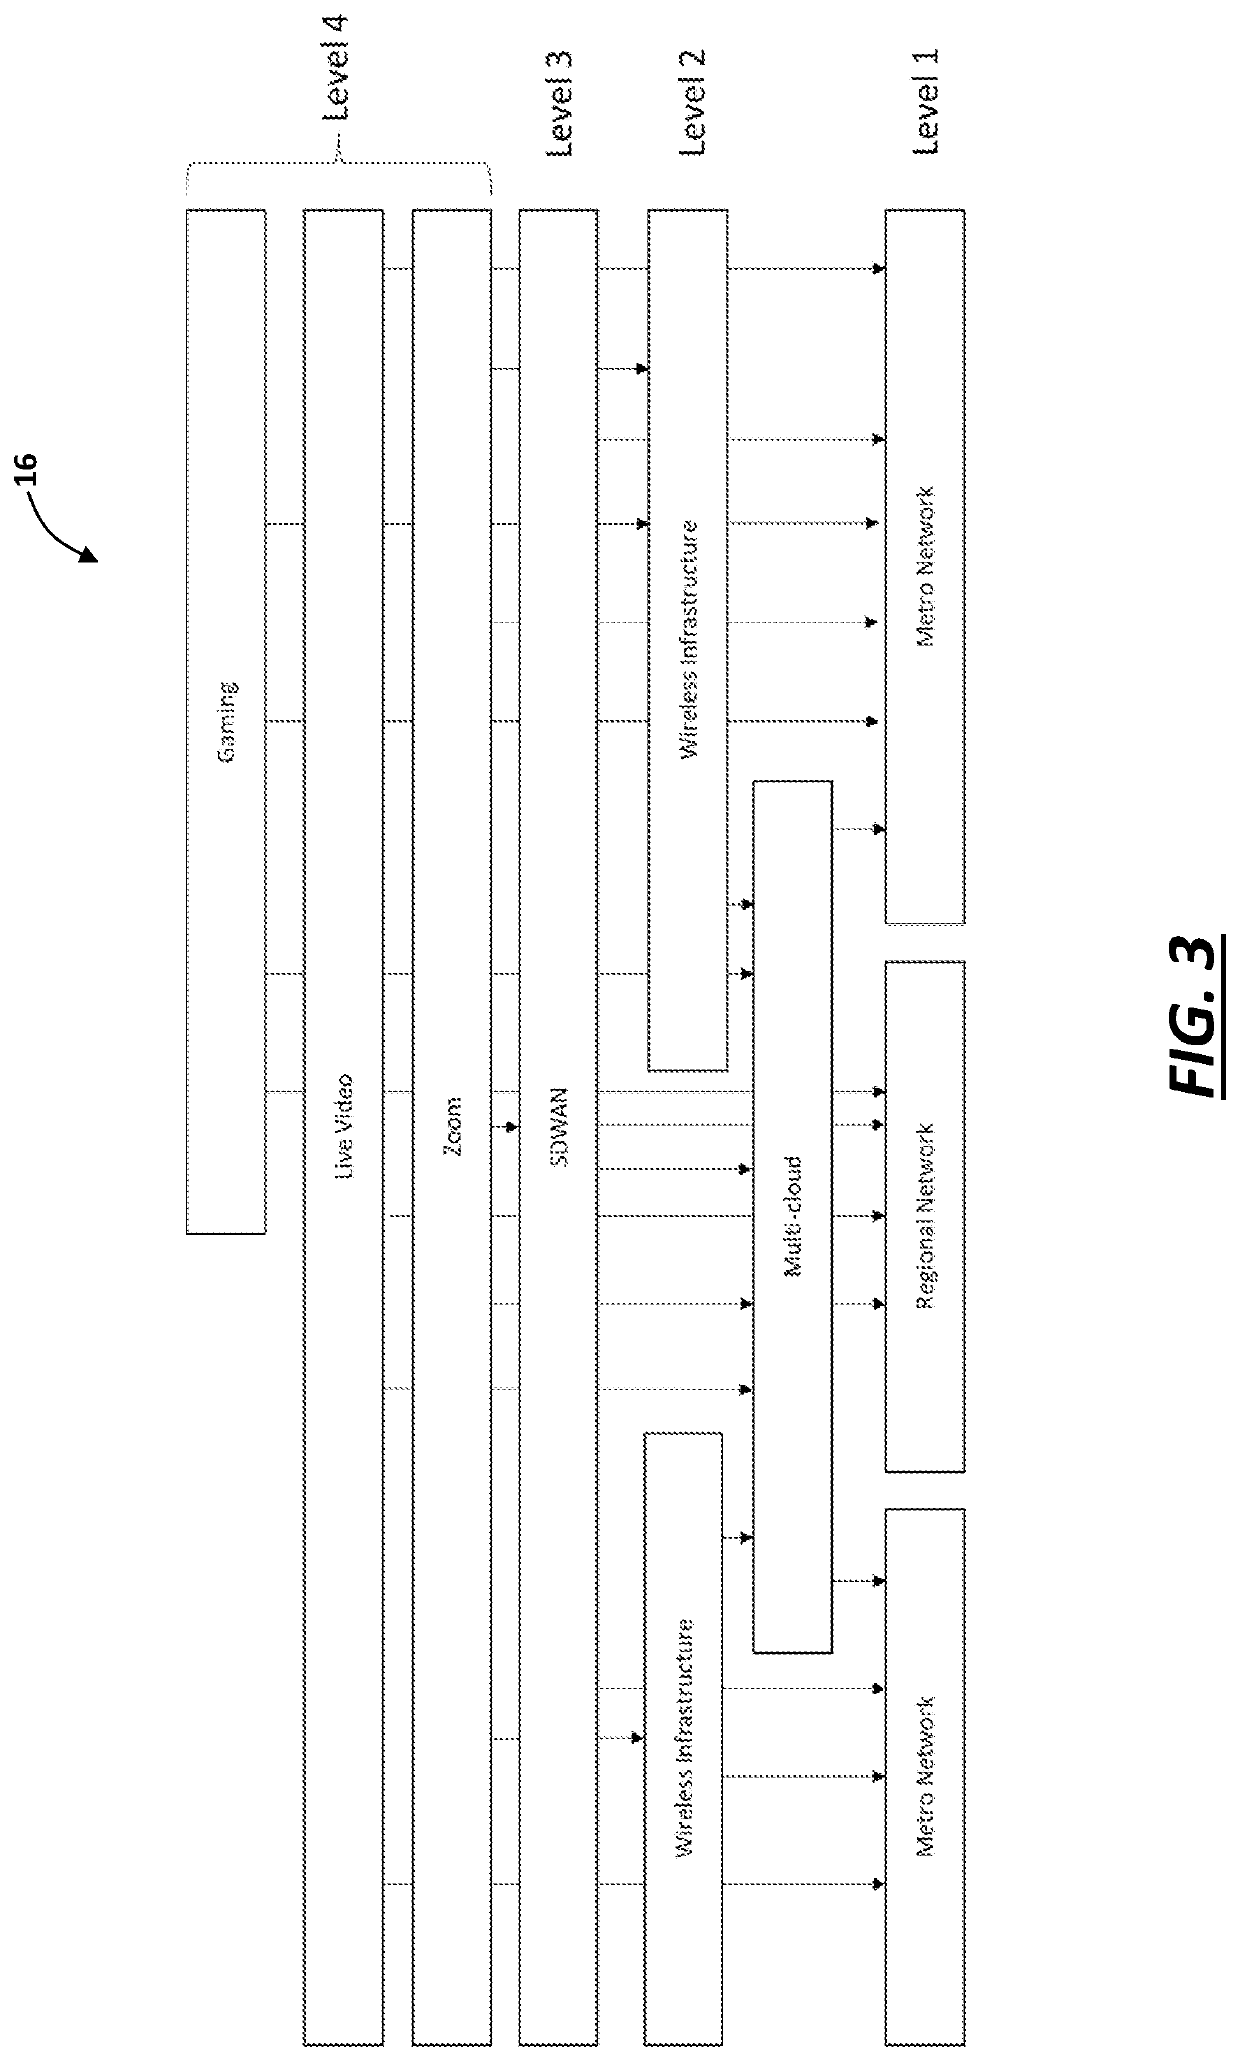 Systems and methods for precisely generalized and modular underlay/overlay service and experience assurance